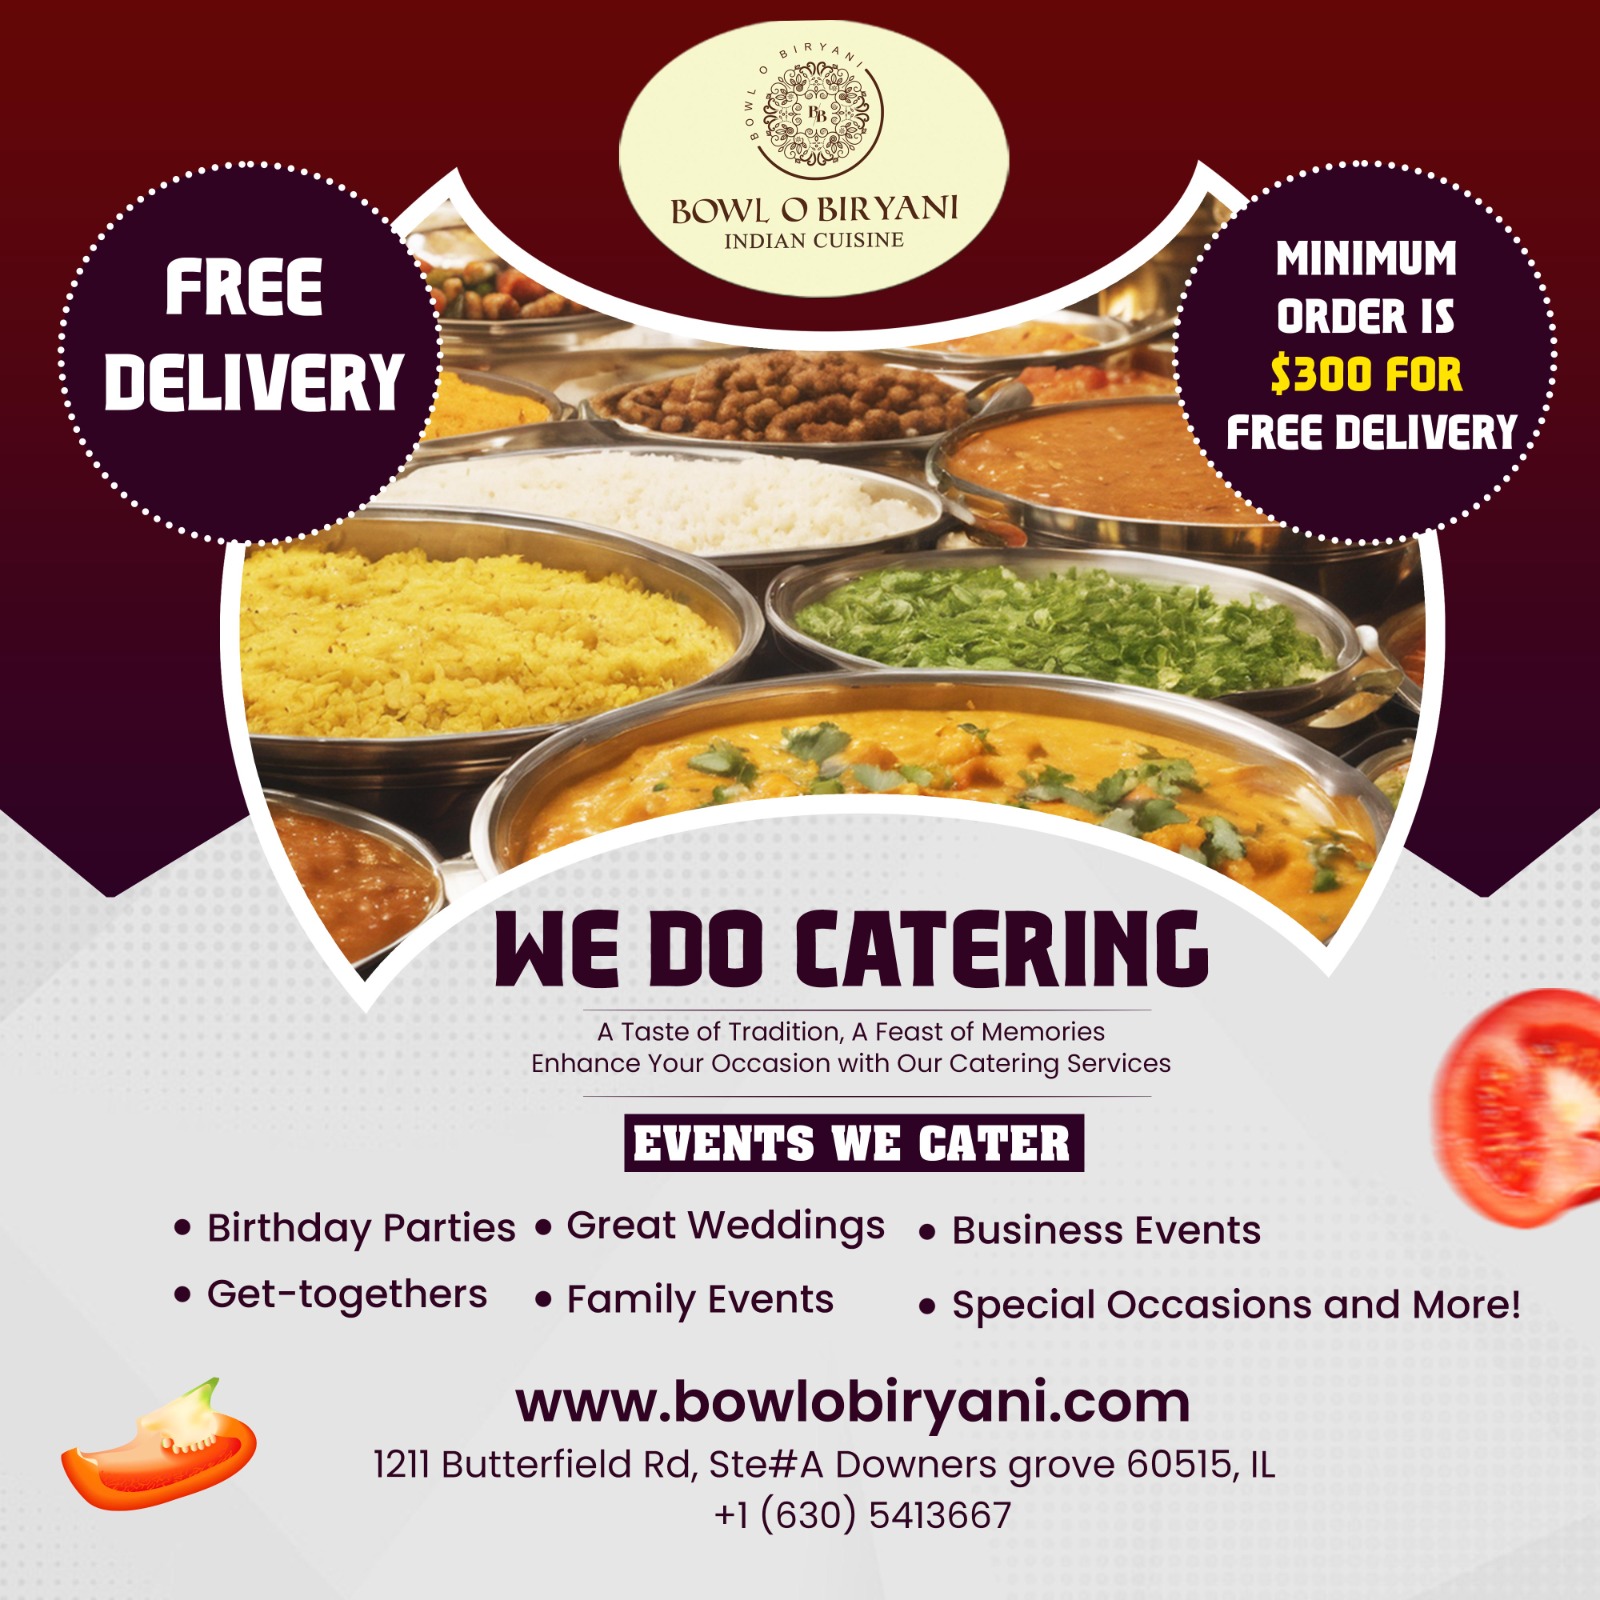 Enhance Your Occasion with Our Catering Services Free Delivery 